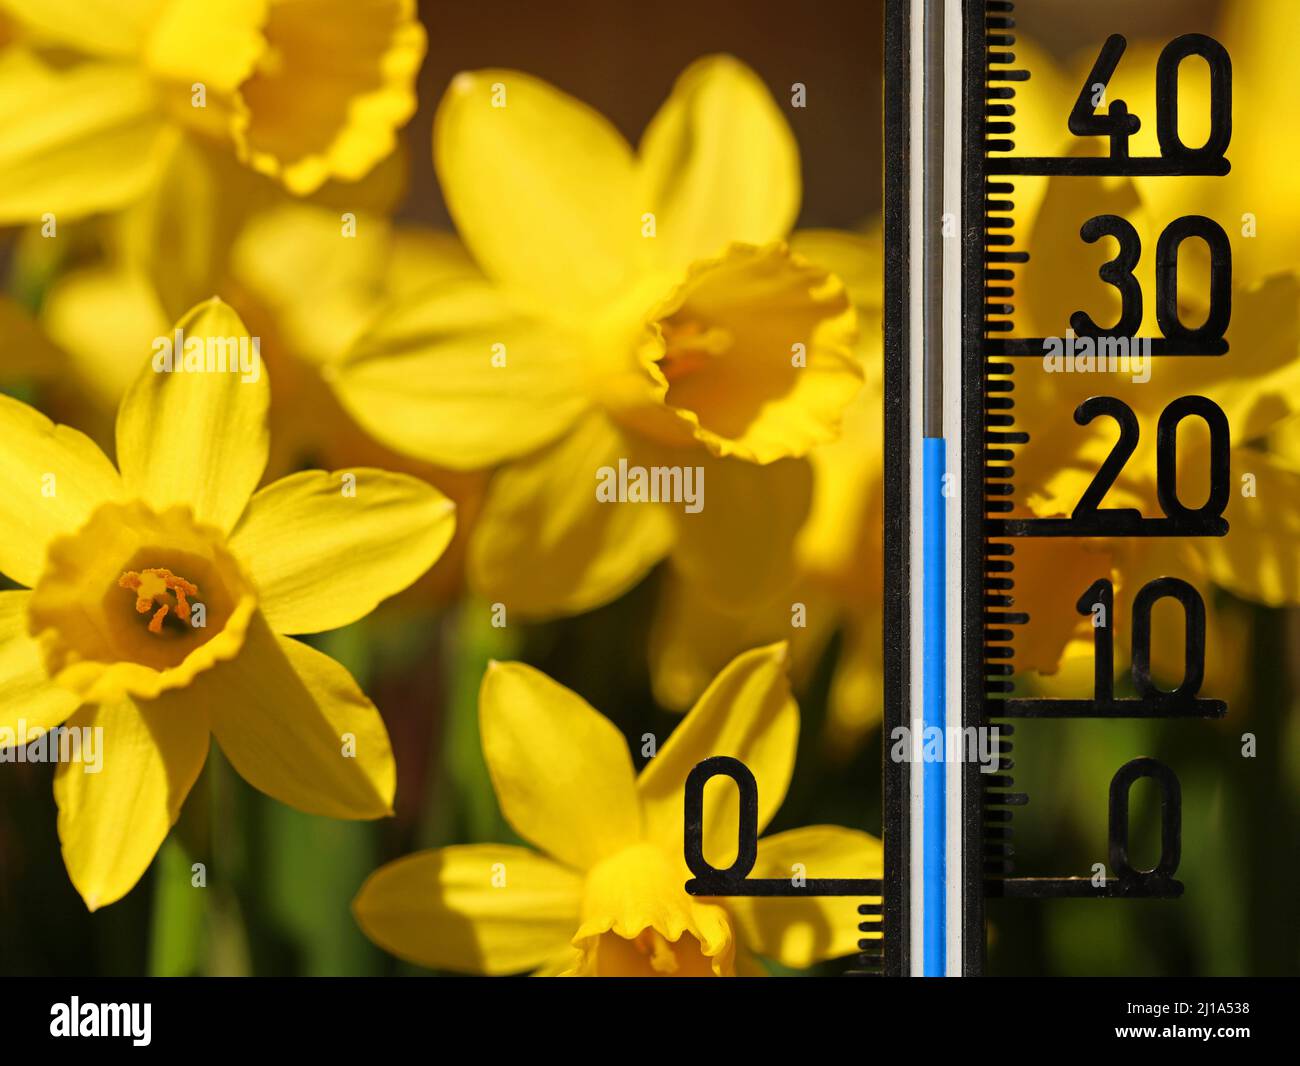 Thermometer shows 25 degrees celsius in yellow daffodils, classic spring flowers close up Stock Photo